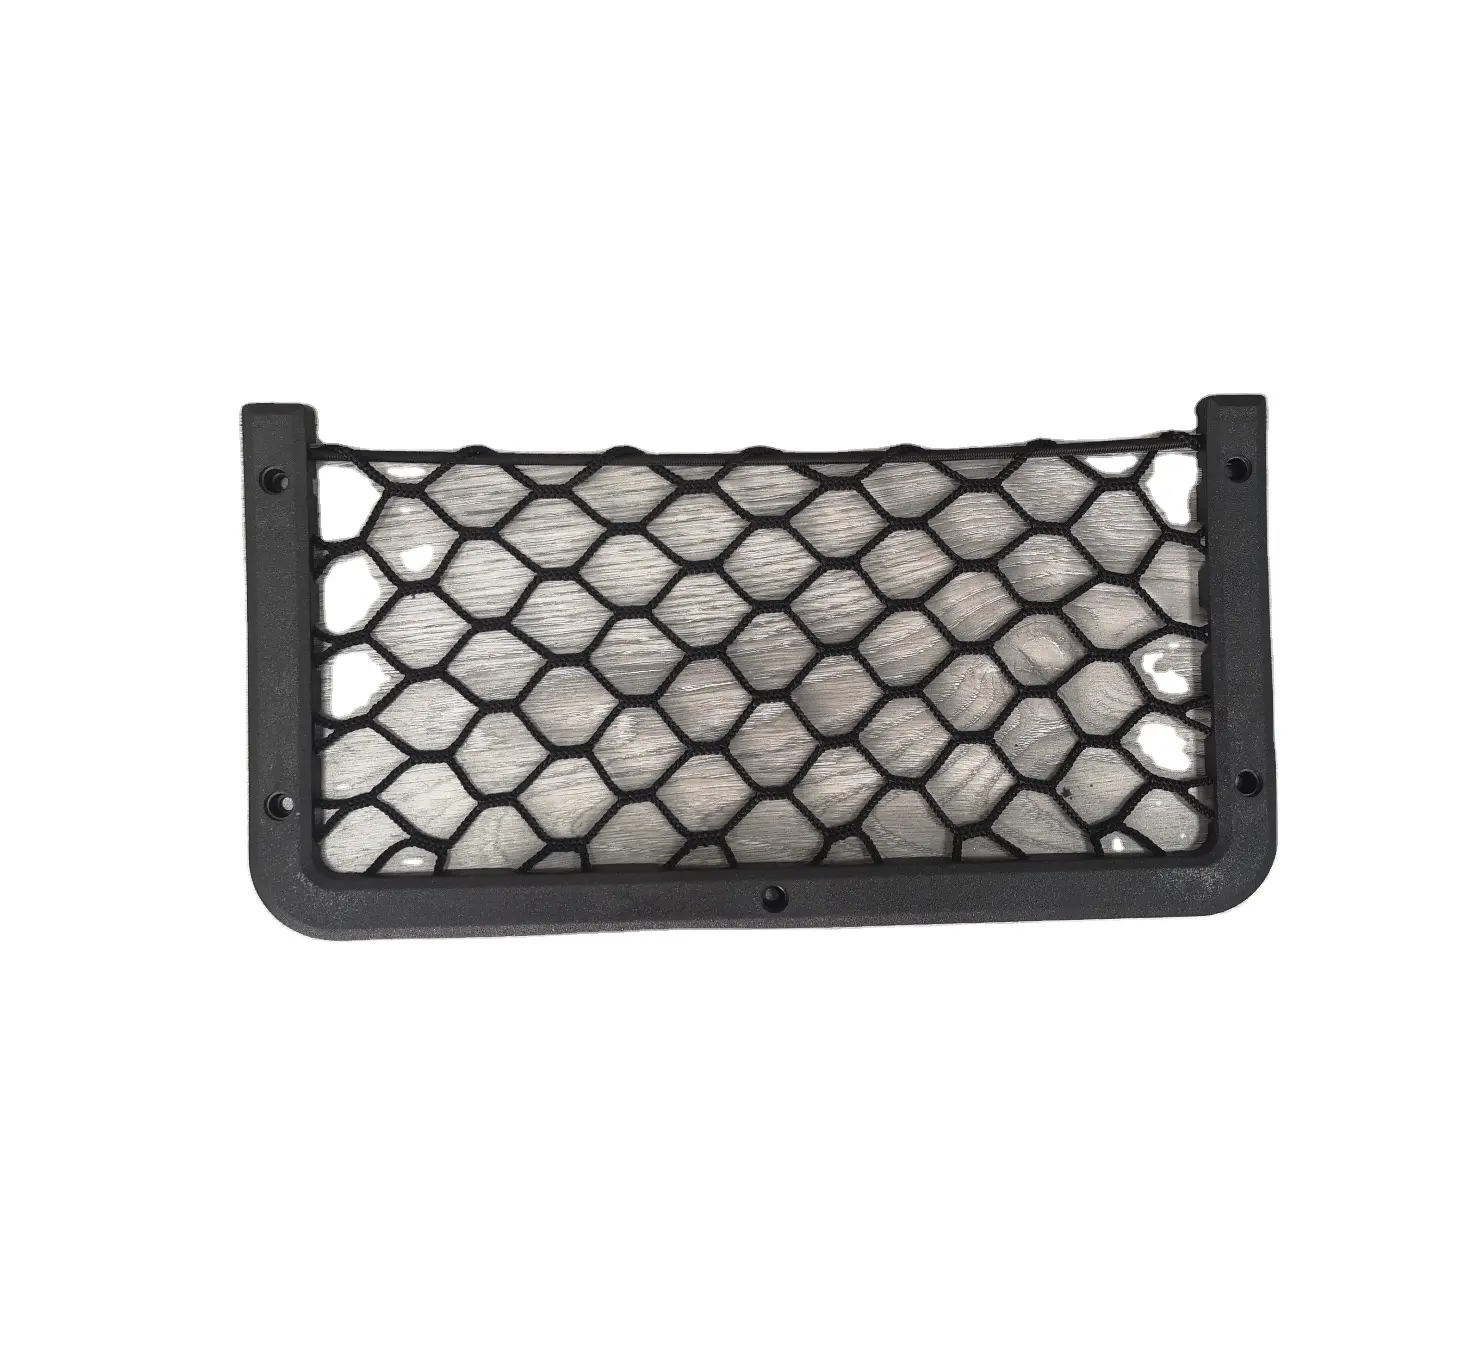 High quality and resilient car storage net,